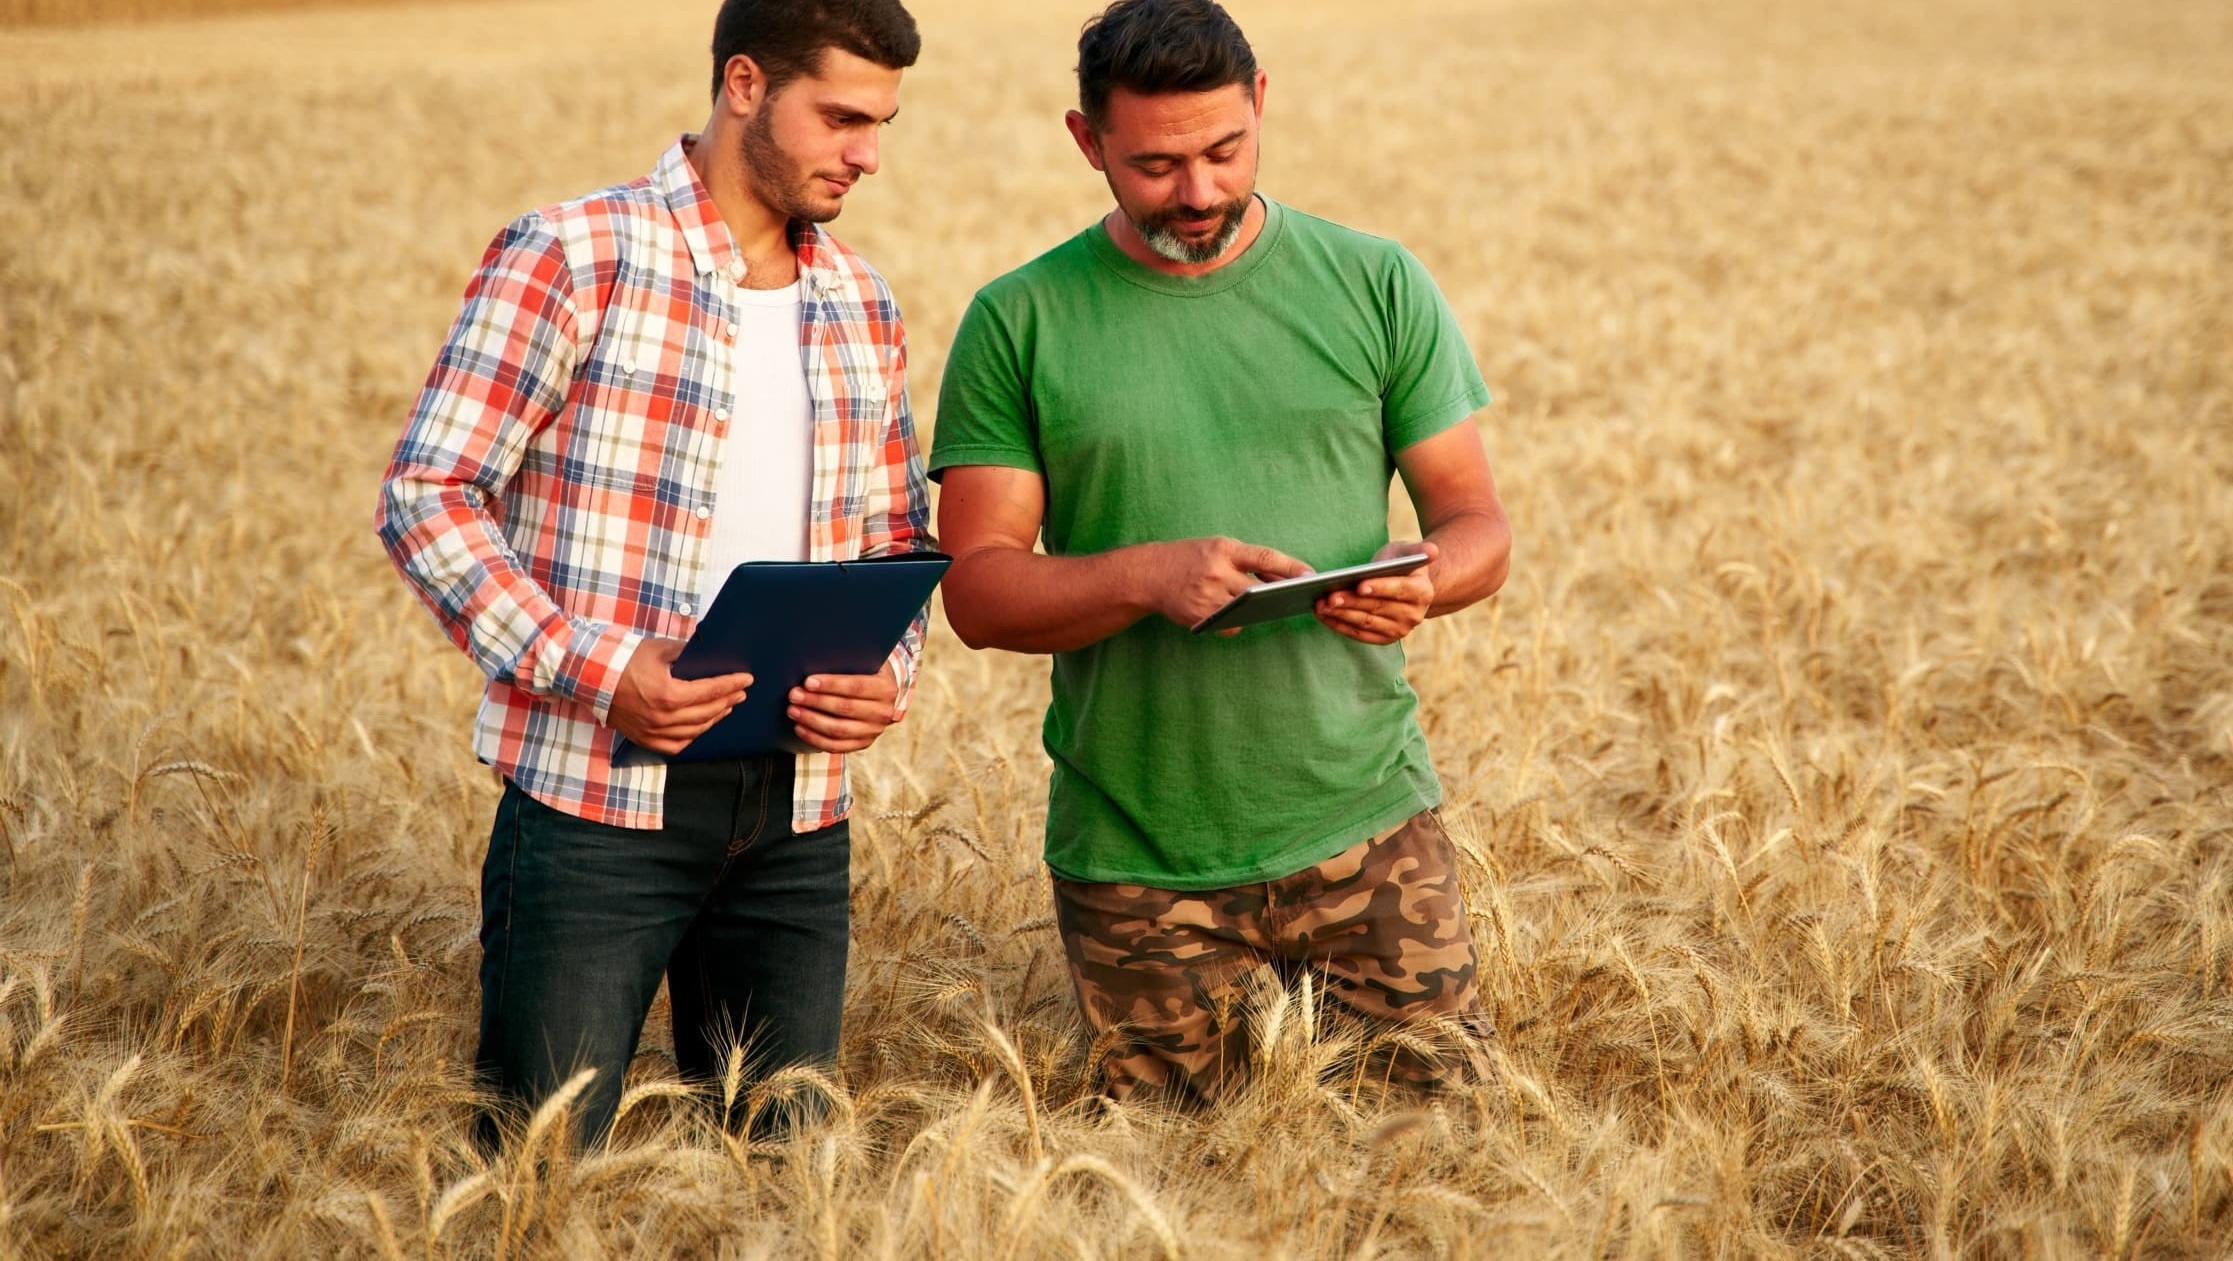 Two men standing together in the middle of a wheat field, both looking down at the laptop computer in the hands of the man on the right